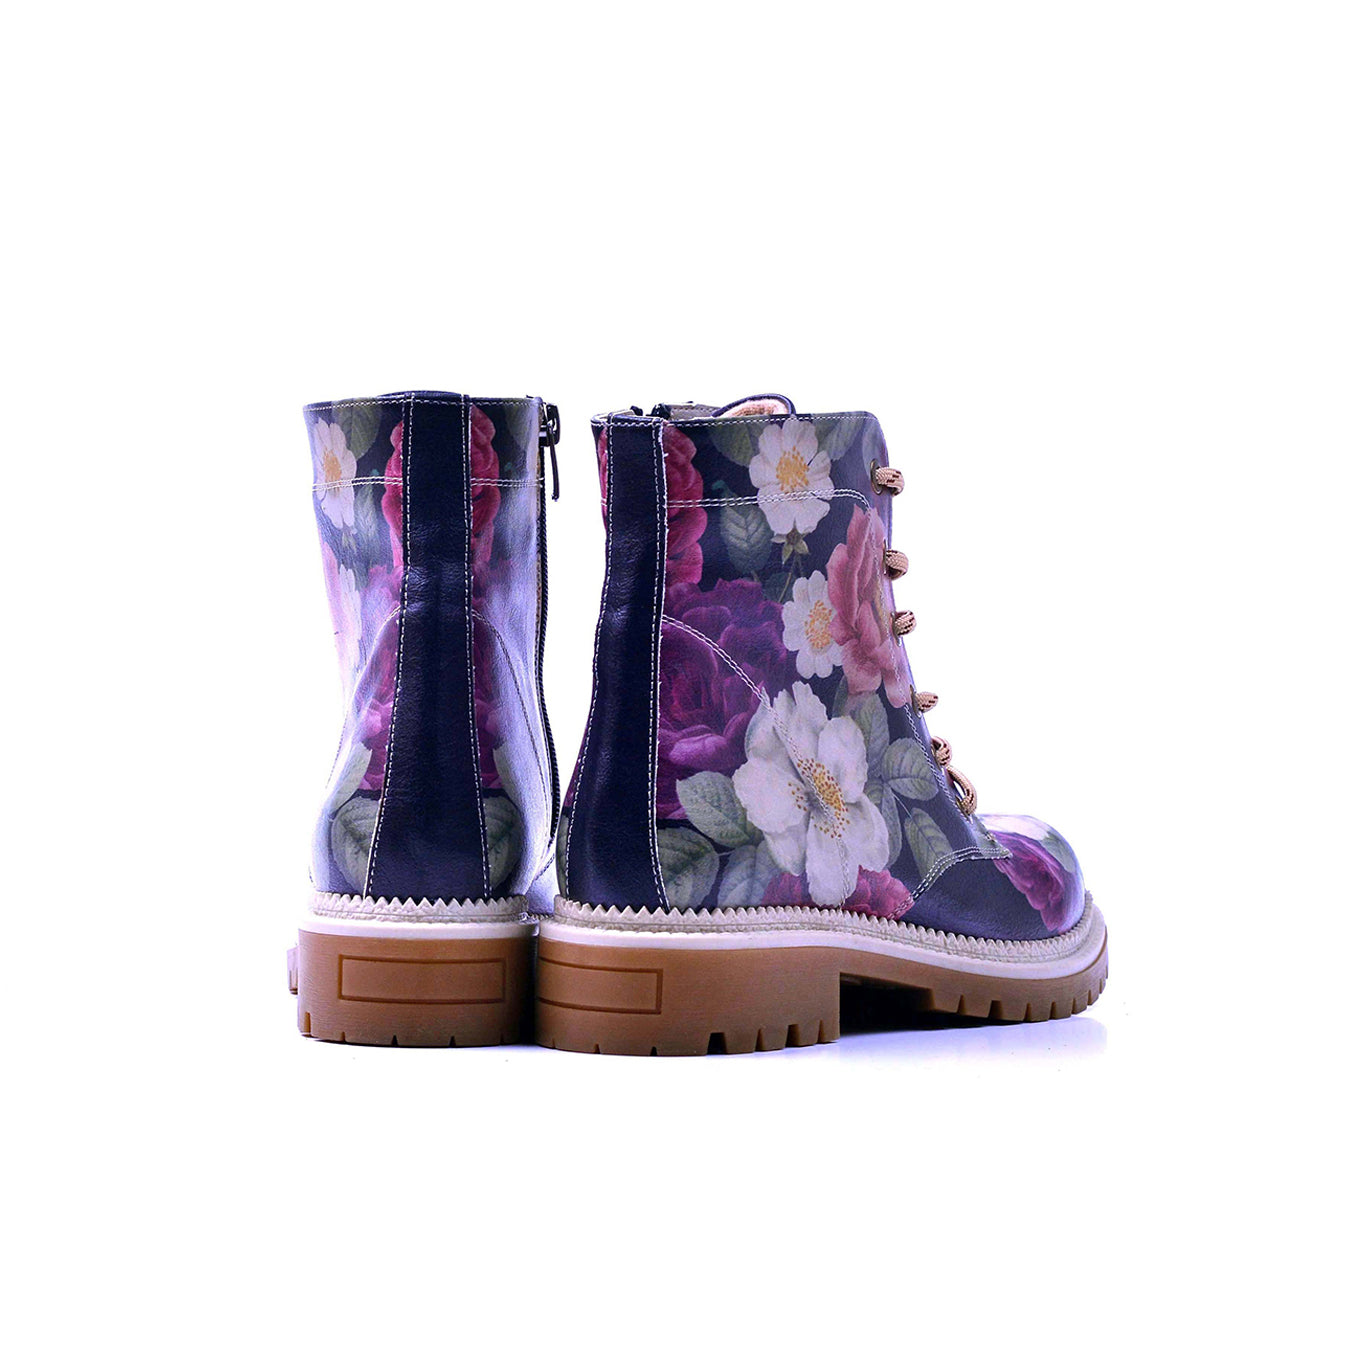 Spring Bloom Printed Lace-up and Side Zippered Women's Vegan Boots, Wearable Art with Unique Design